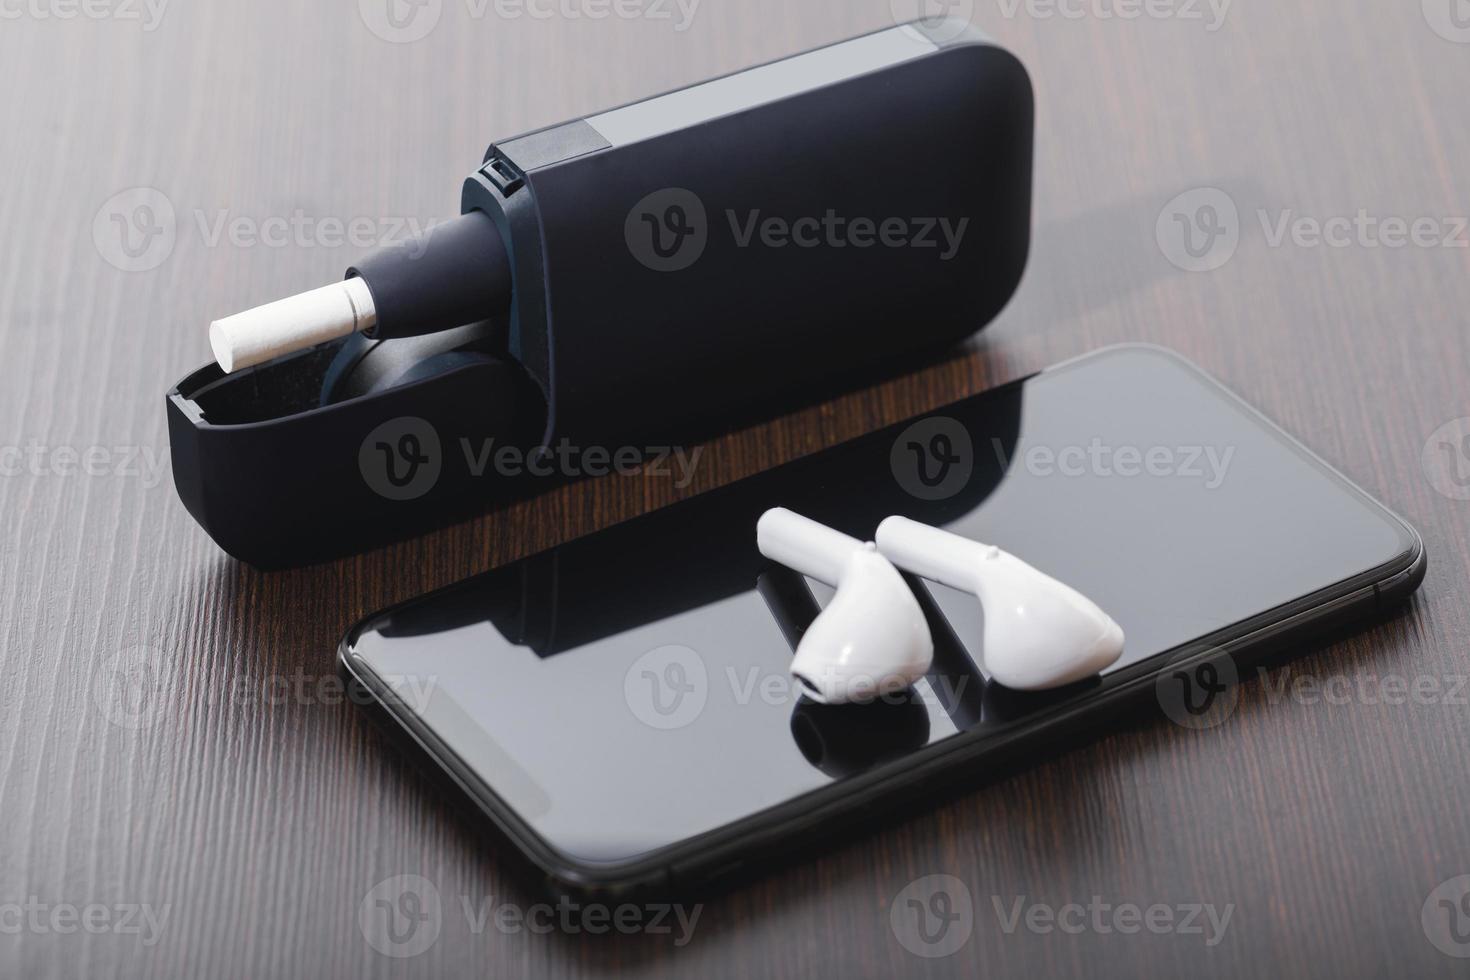 Tobacco heating system, wireless earphones and smartphone photo